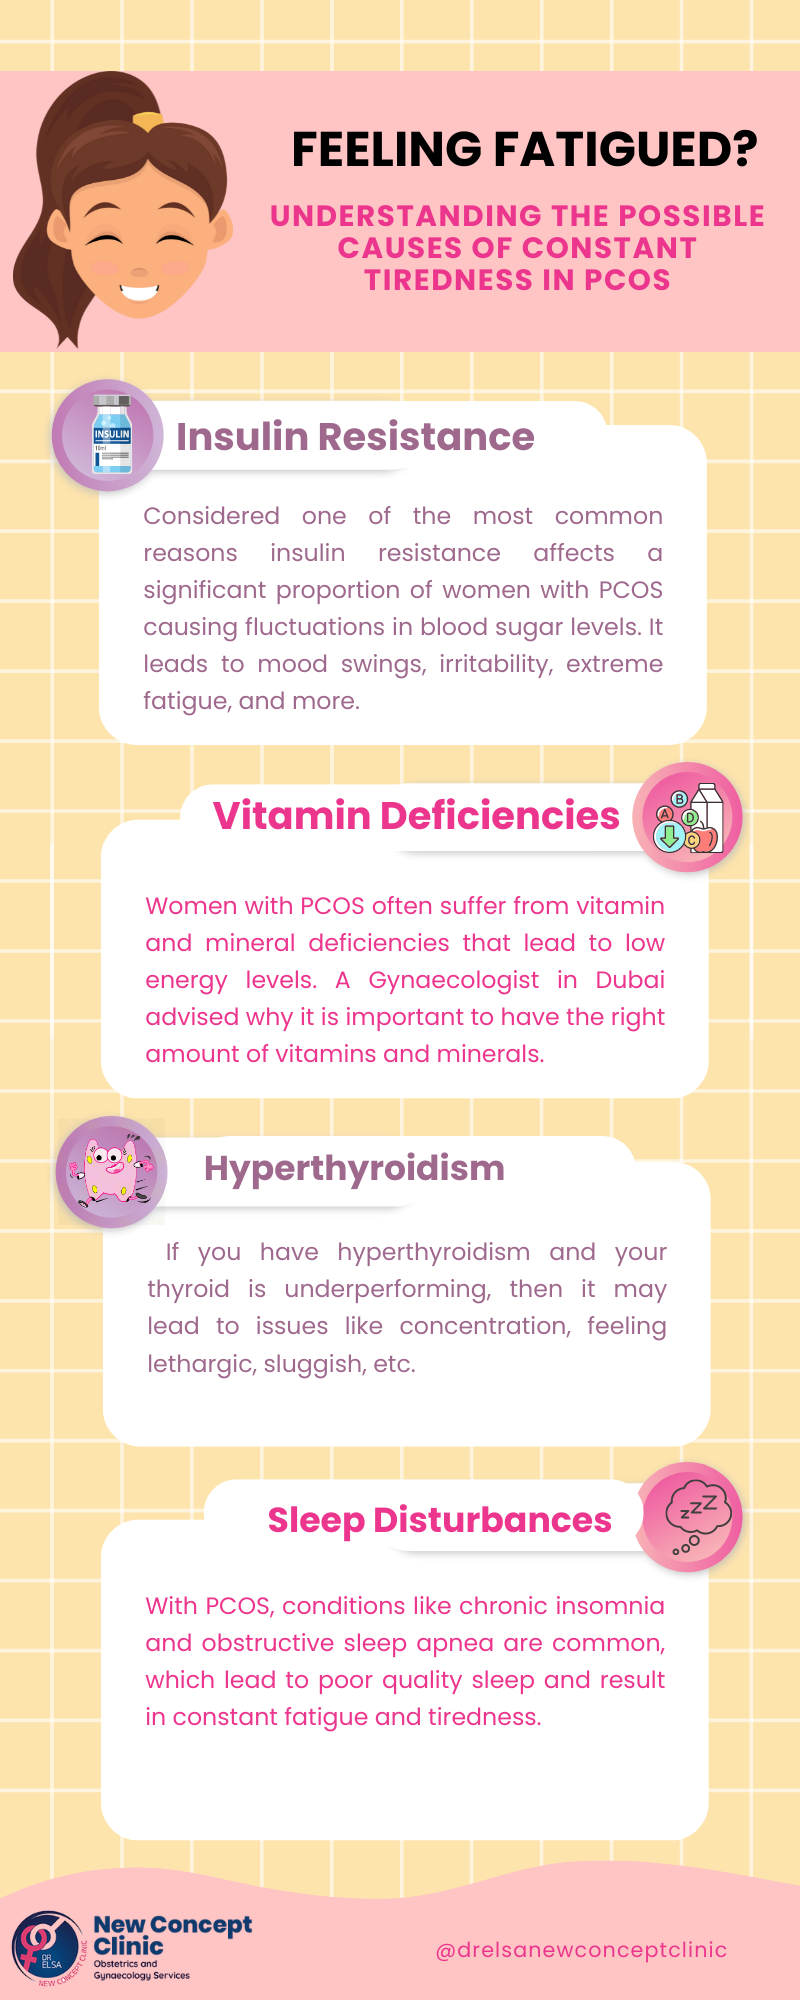 Causes of Constant Tiredness in PCOS